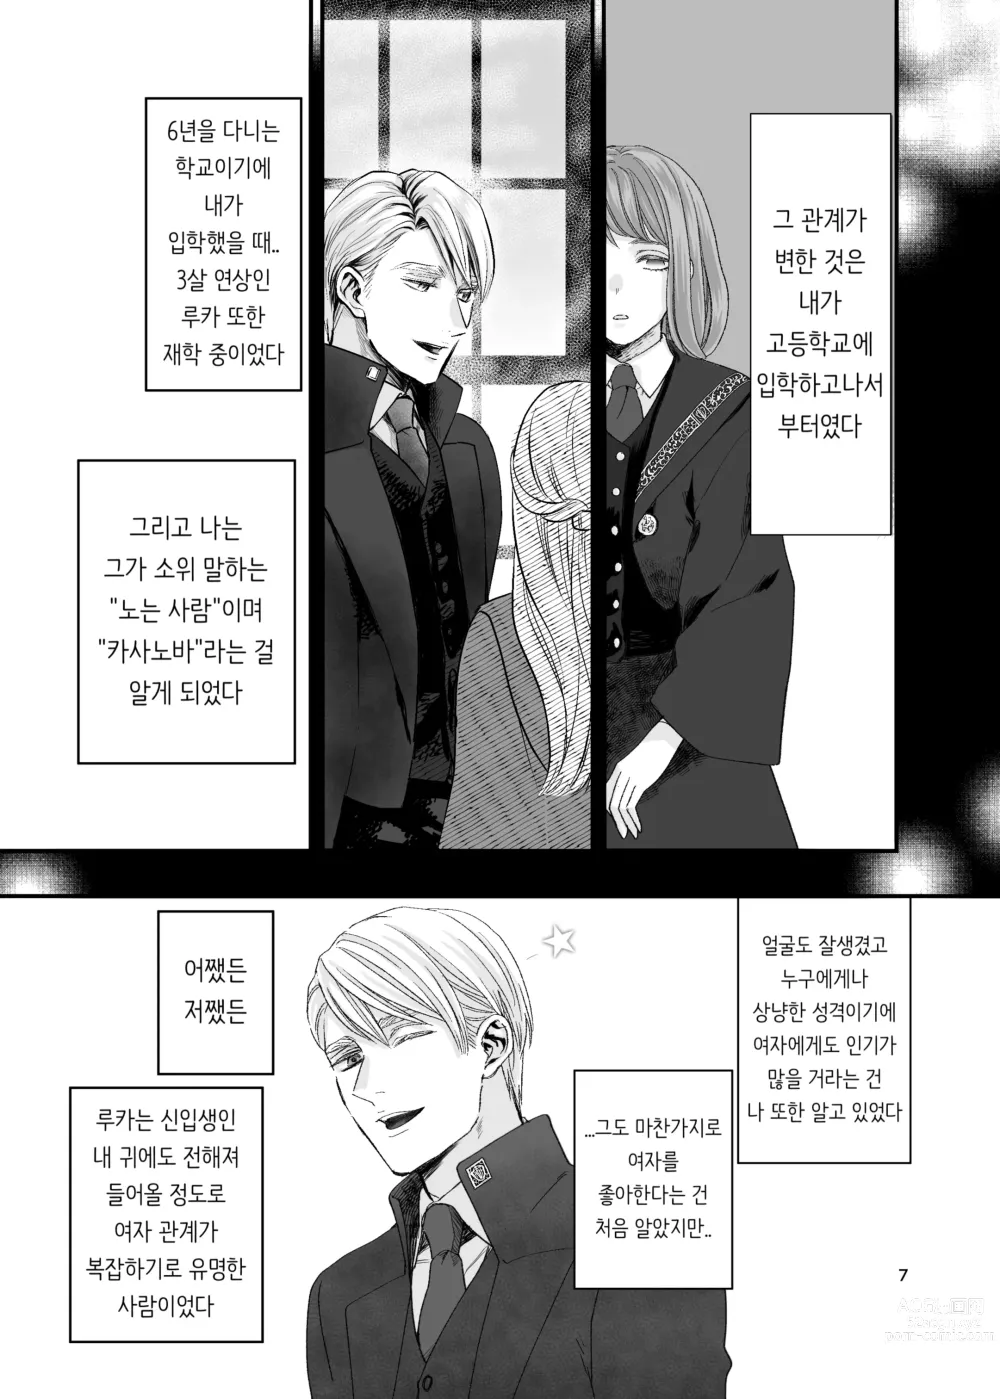 Page 7 of doujinshi 수인 영애와 혼약자